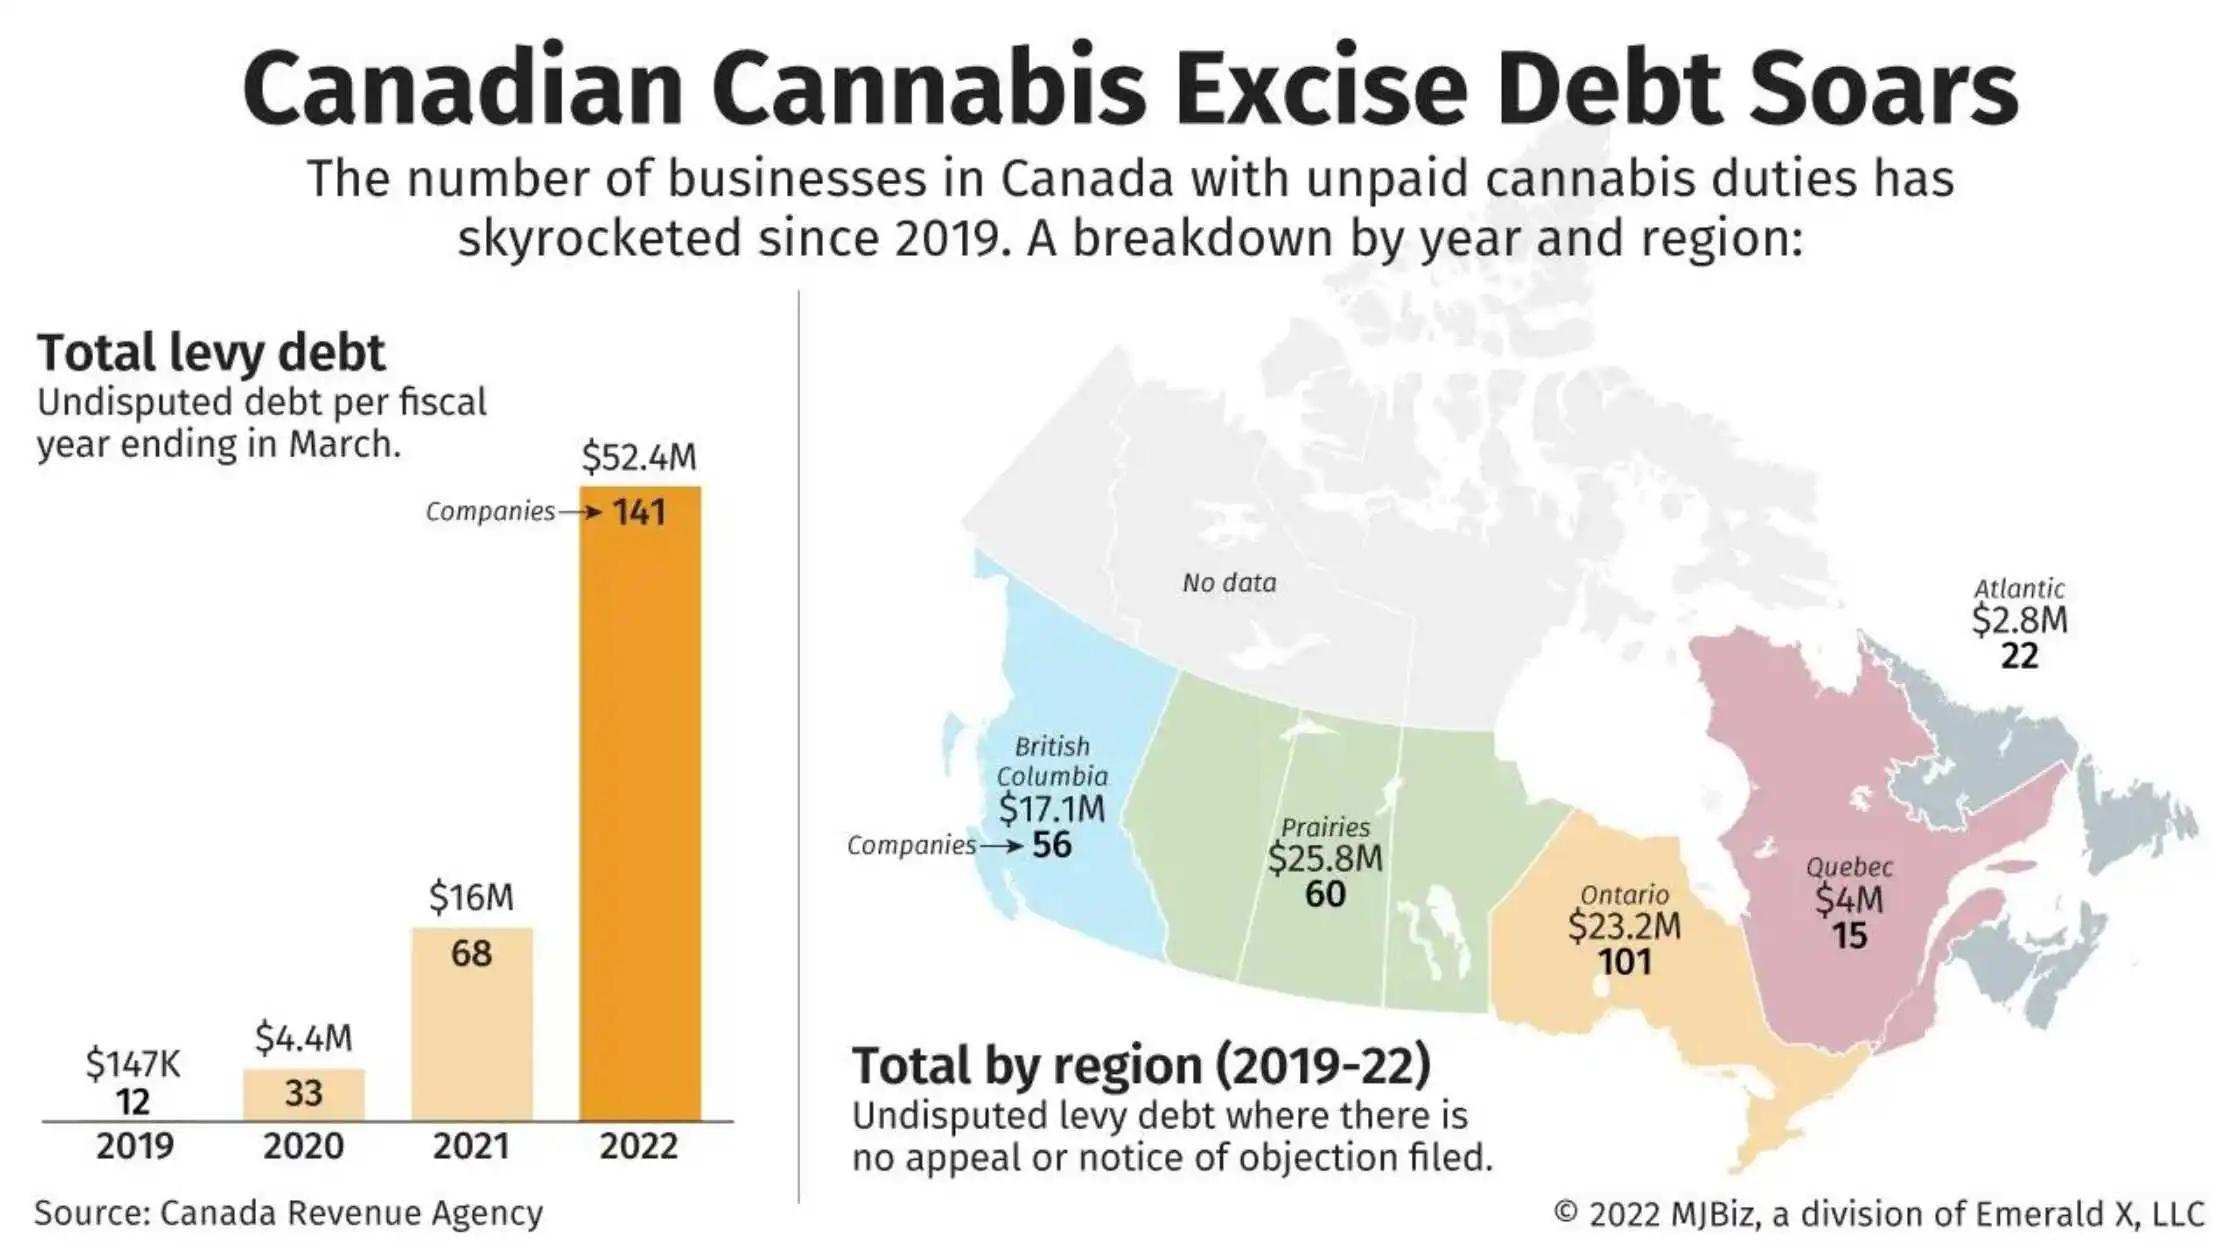 Canadian Cannabis Companies Impending Excise Taxes Spikes to CA$52M